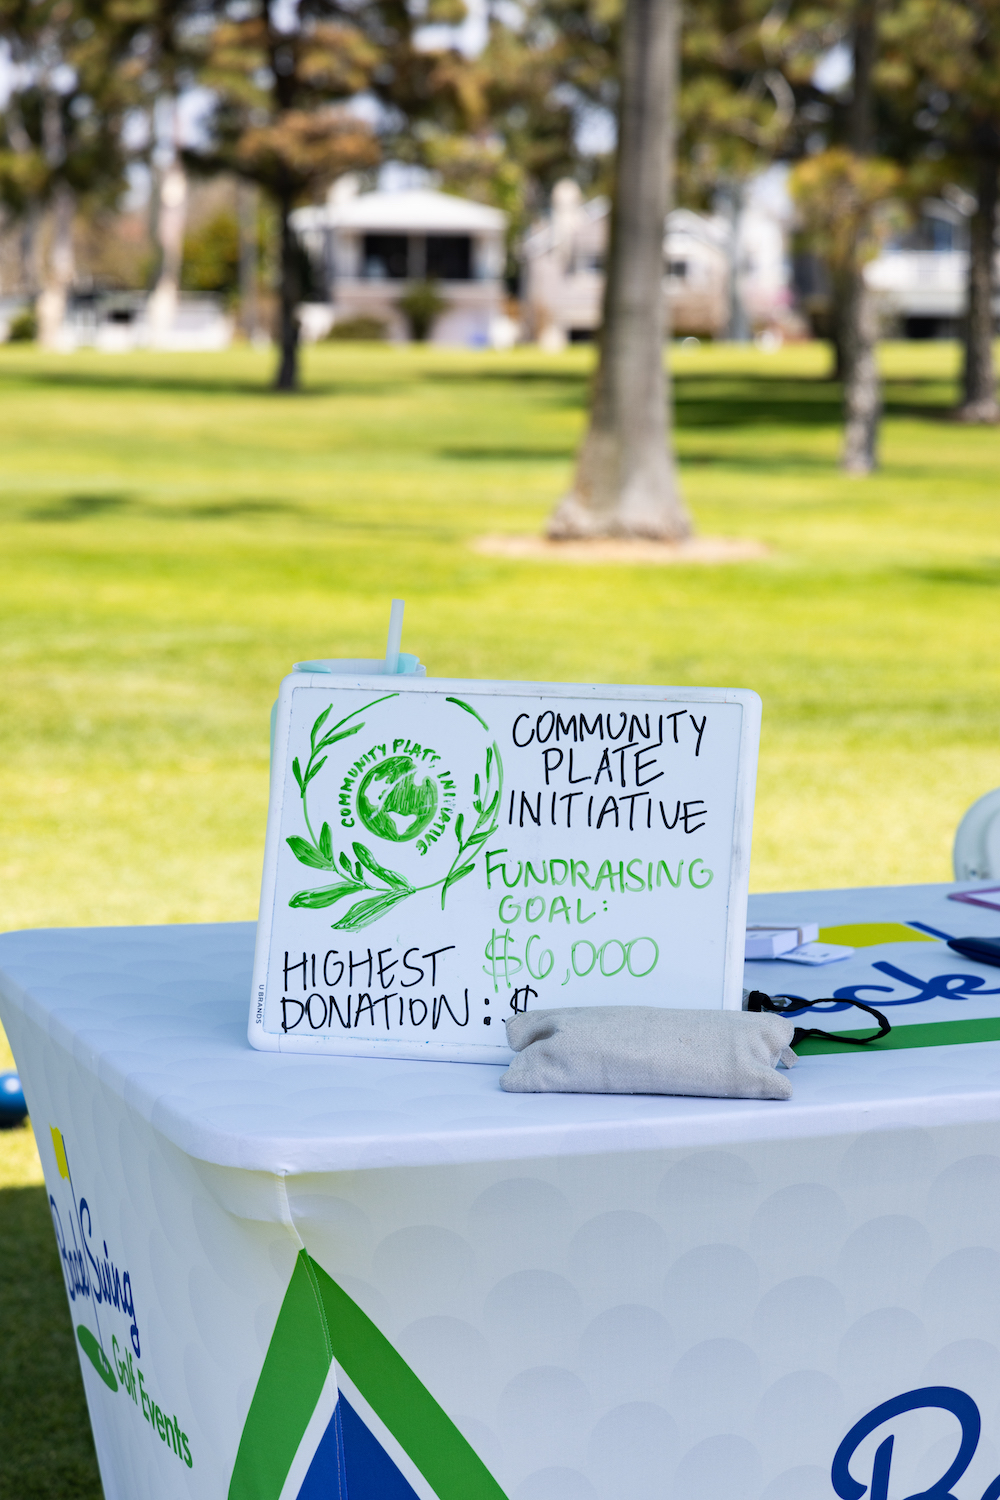 Mister A's inaugural charity golf tournament at Coronado Golf Course to support hunger relief programs by San Diego nonprofit Community Plate Initiative